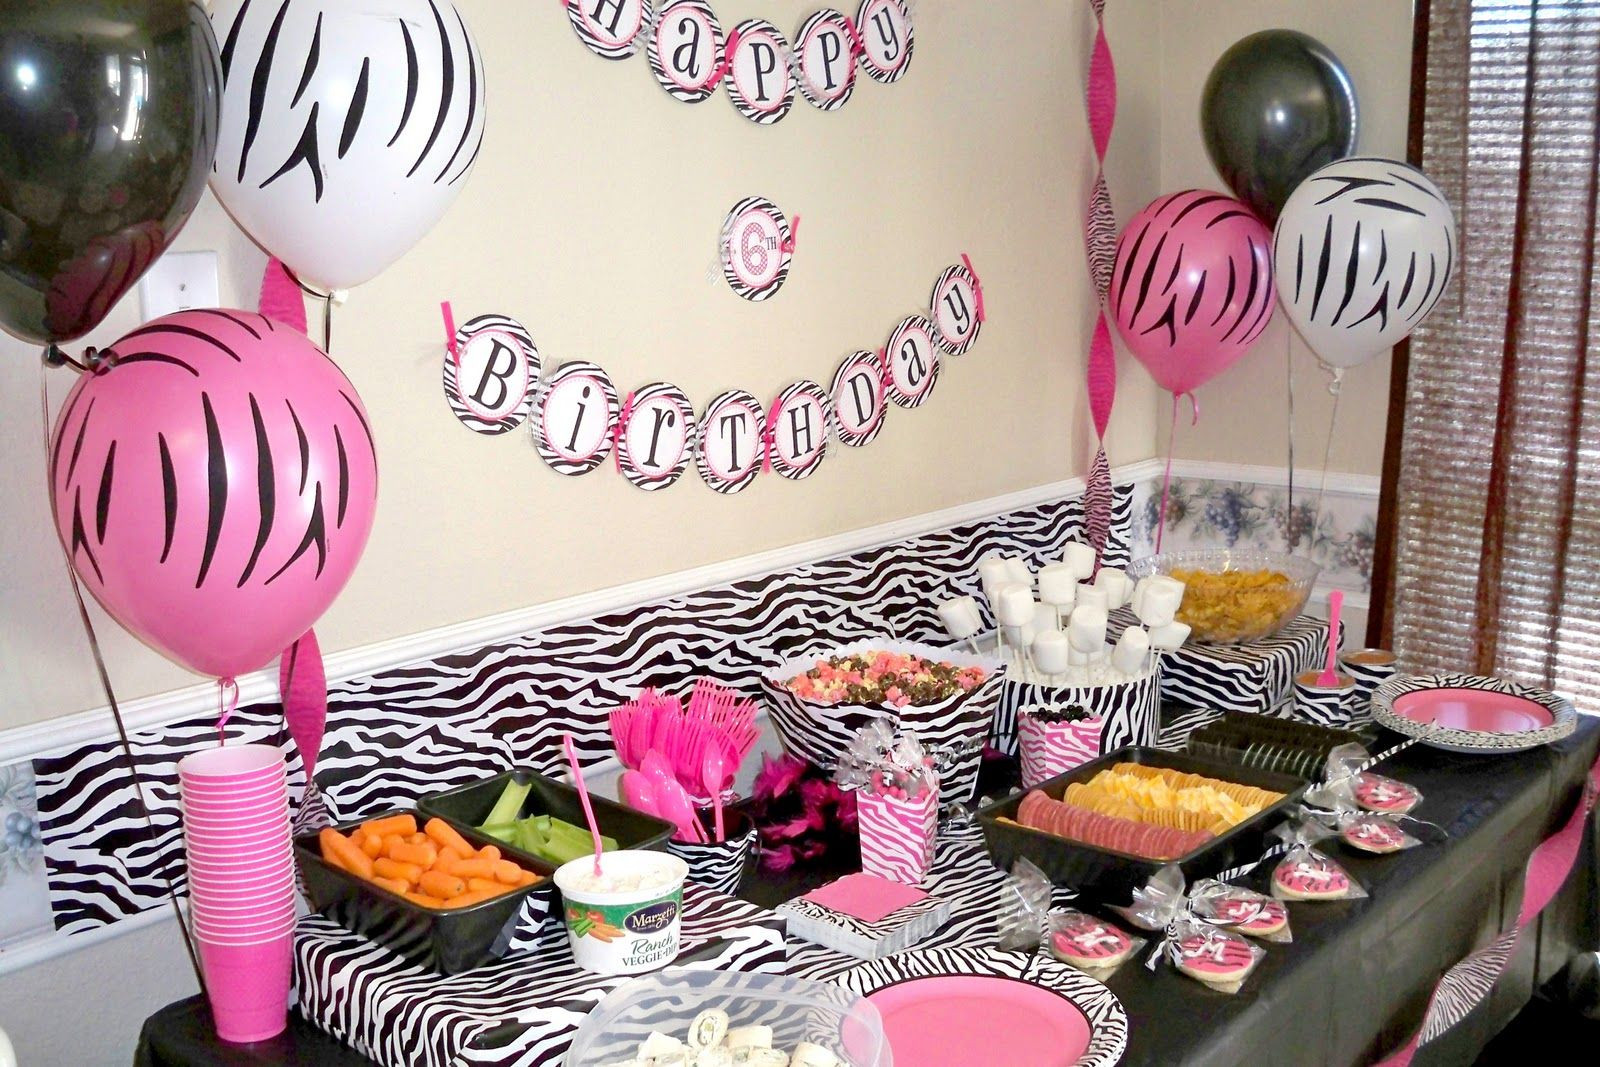 Zebra Decorations For Birthday Party
 Zebra table decorations for an animal print party